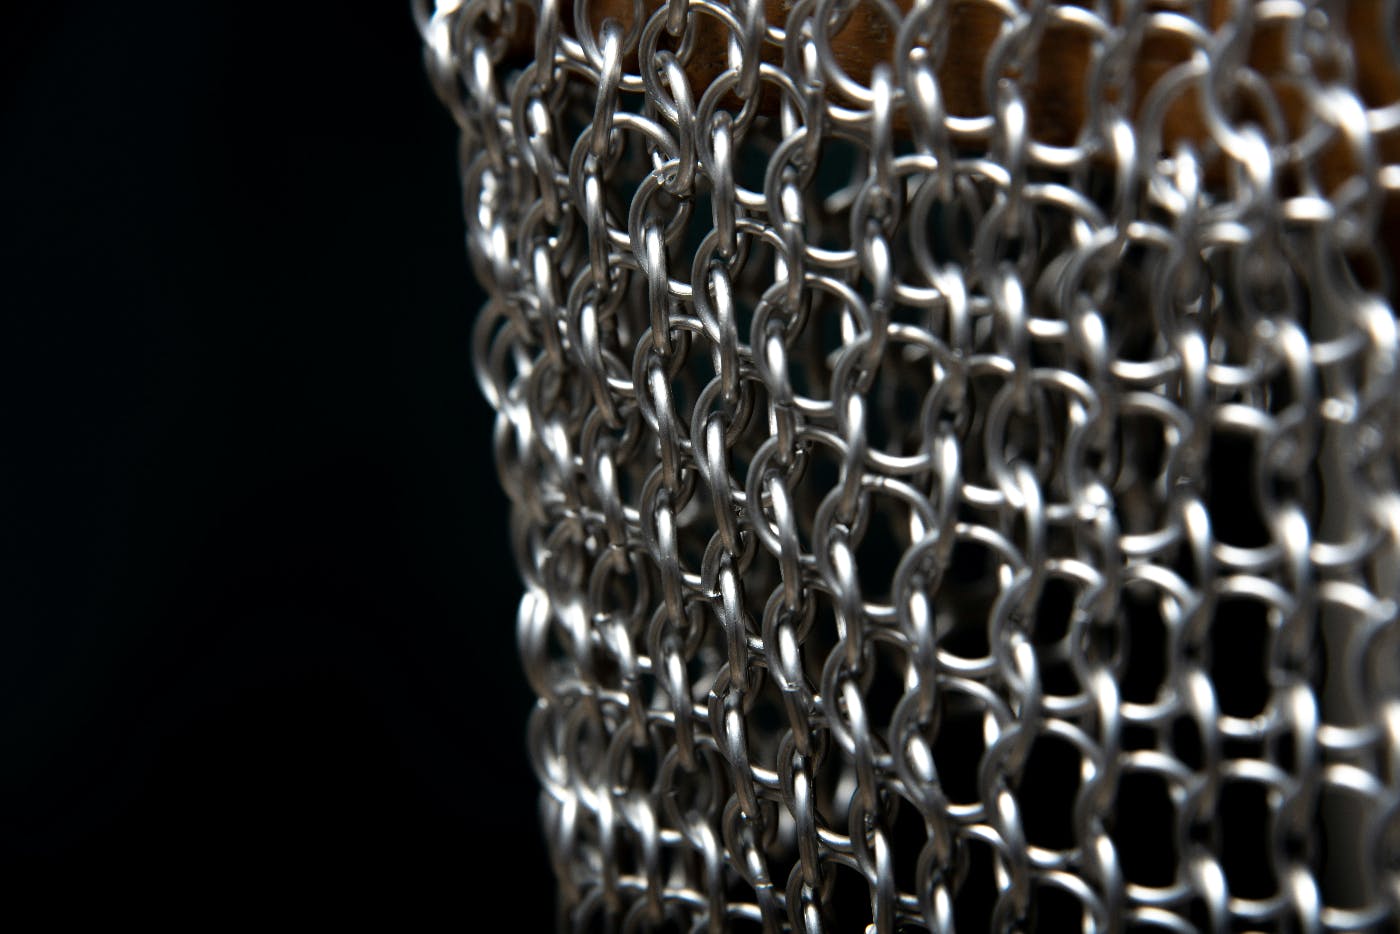 A section of chainmail